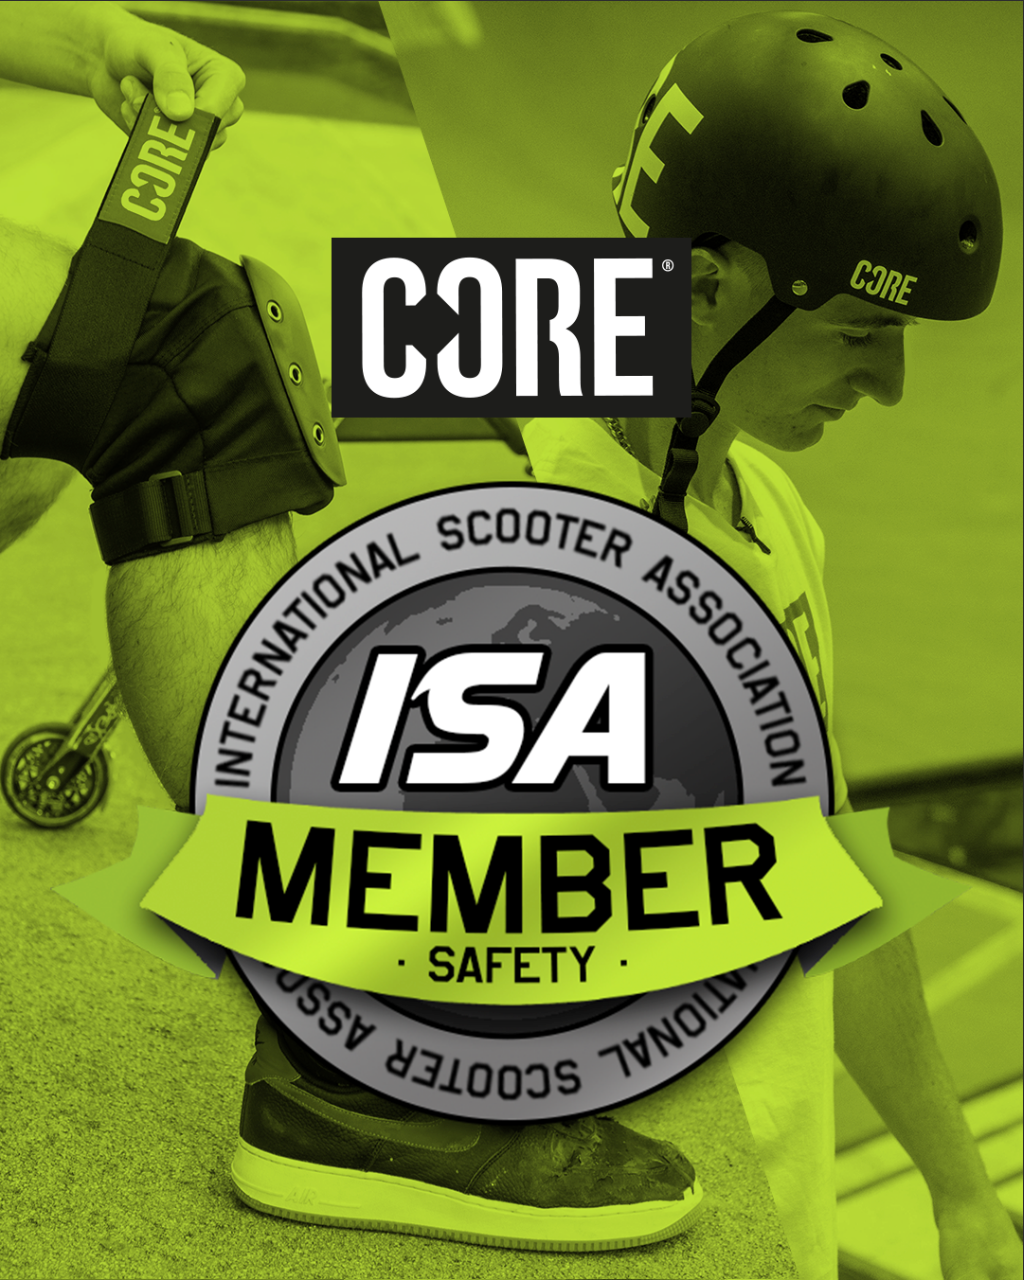 CORE Protection is the Official Safety Sponsor of the ISA!